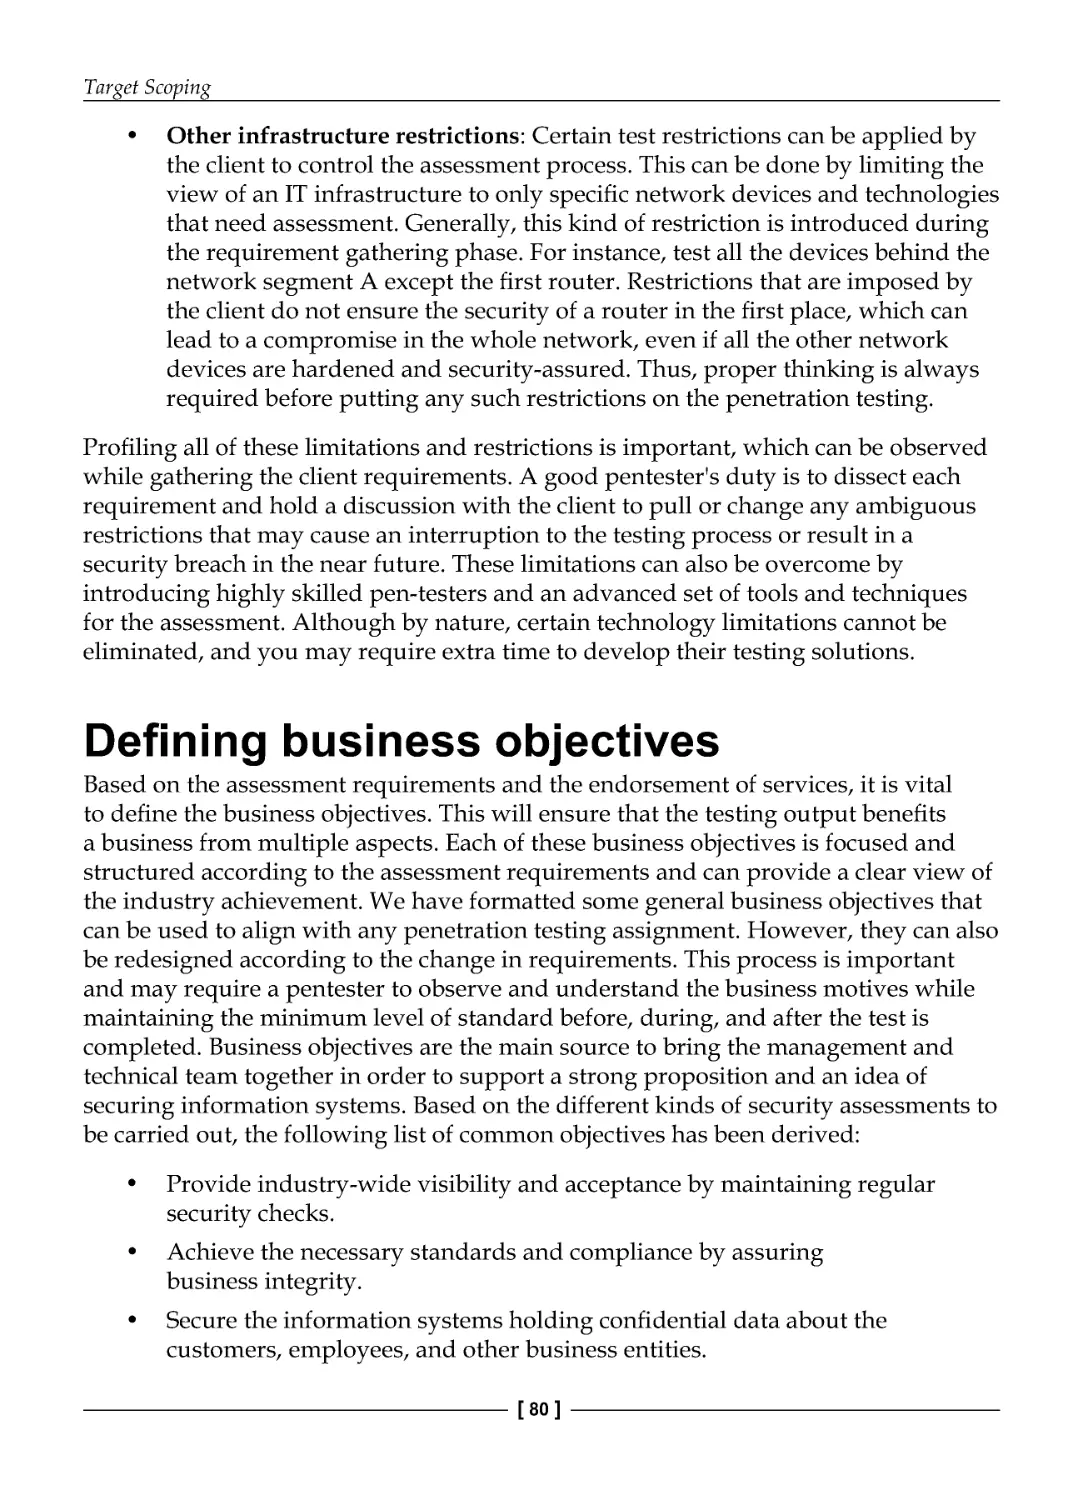 Defining business objectives